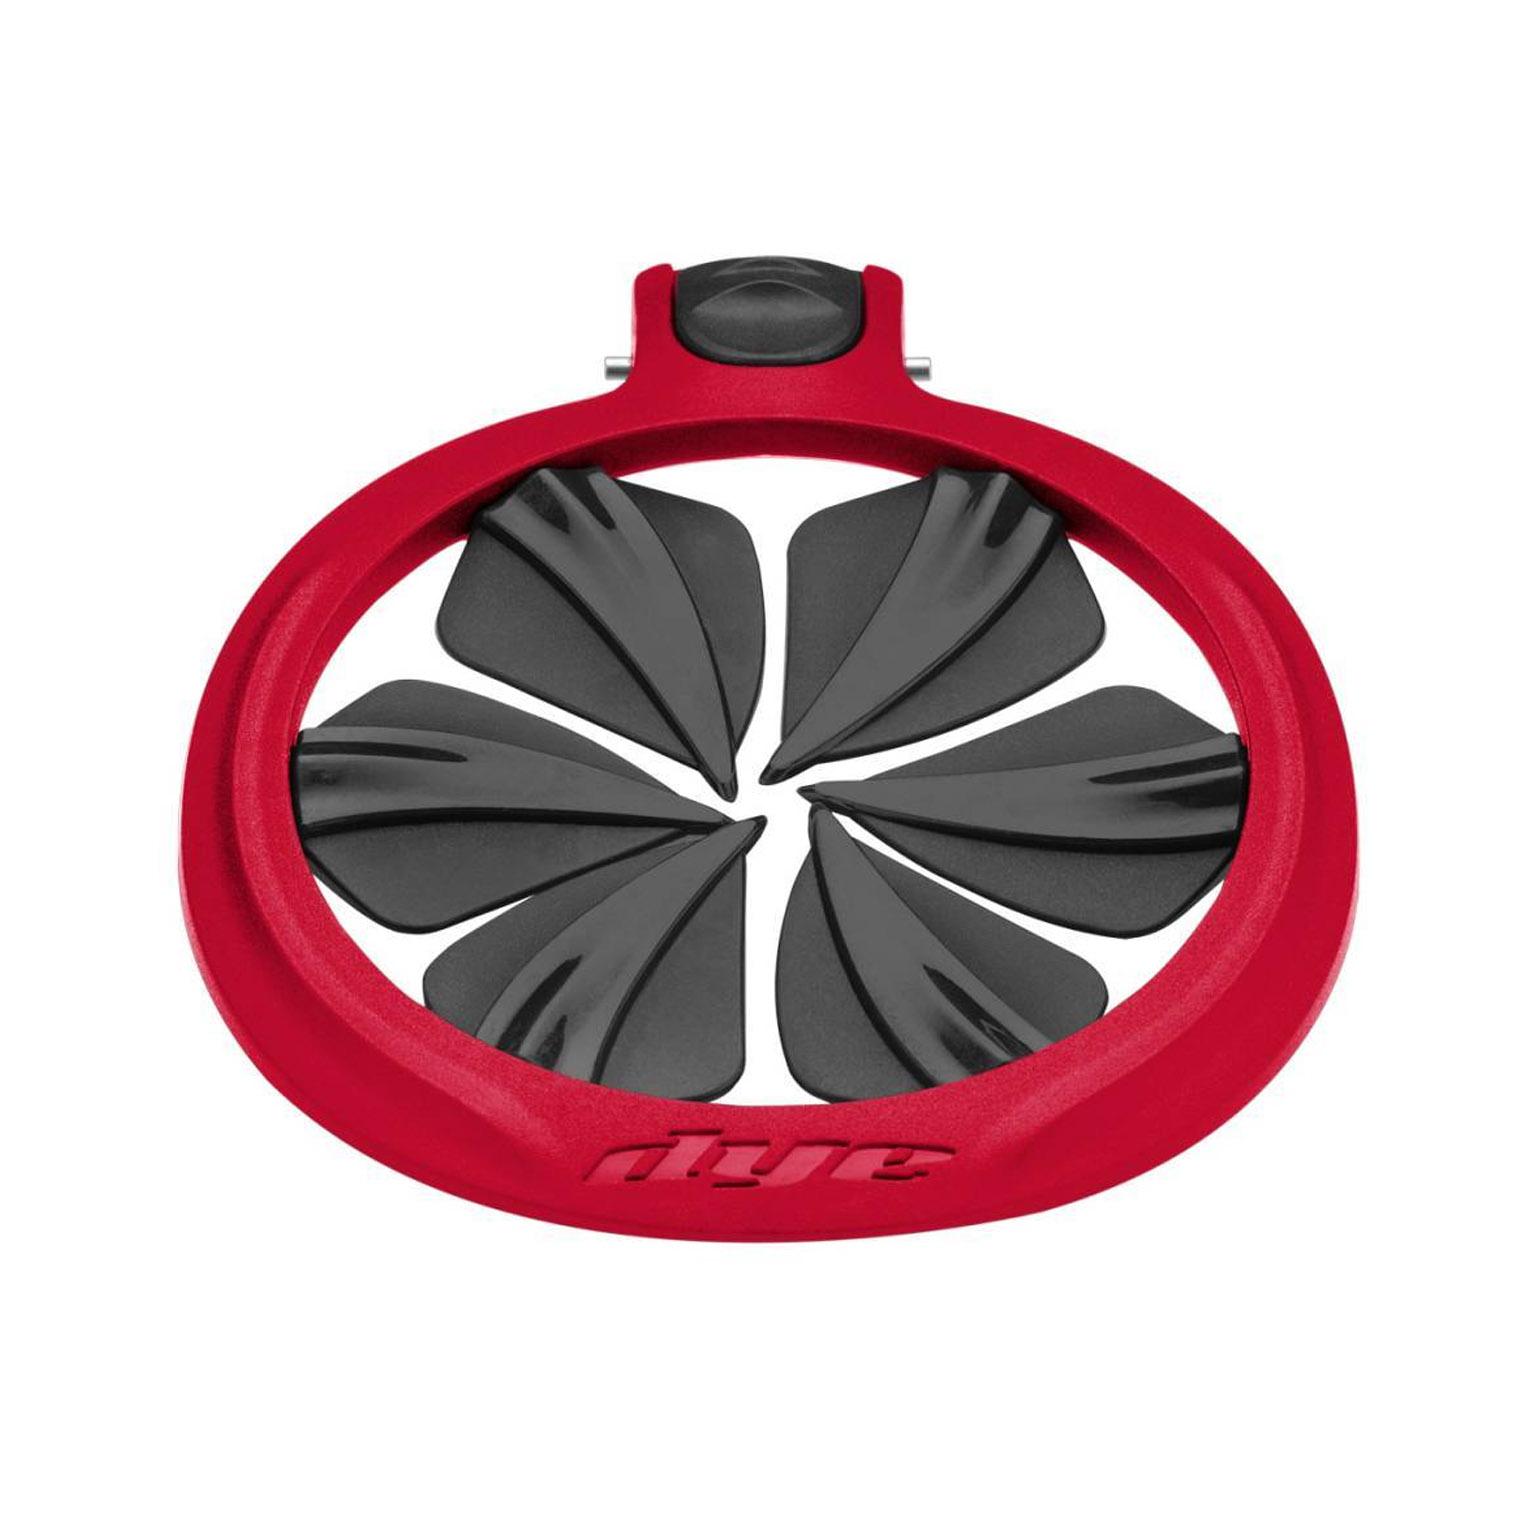 Dye R2 Quick Feed Rotor Red/Black